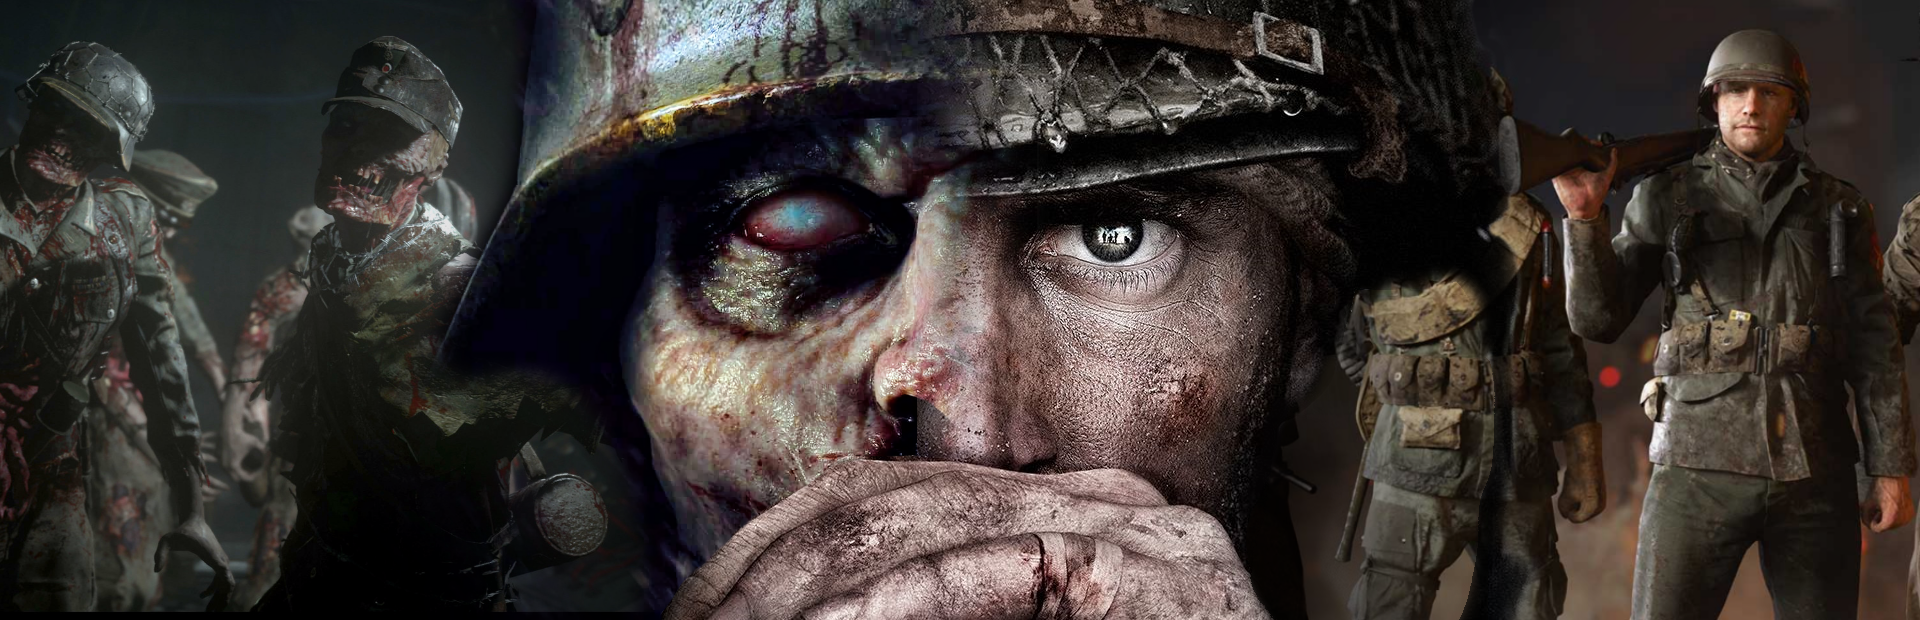 Call of Duty: WW2 Multiplayer Free on Steam This Weekend